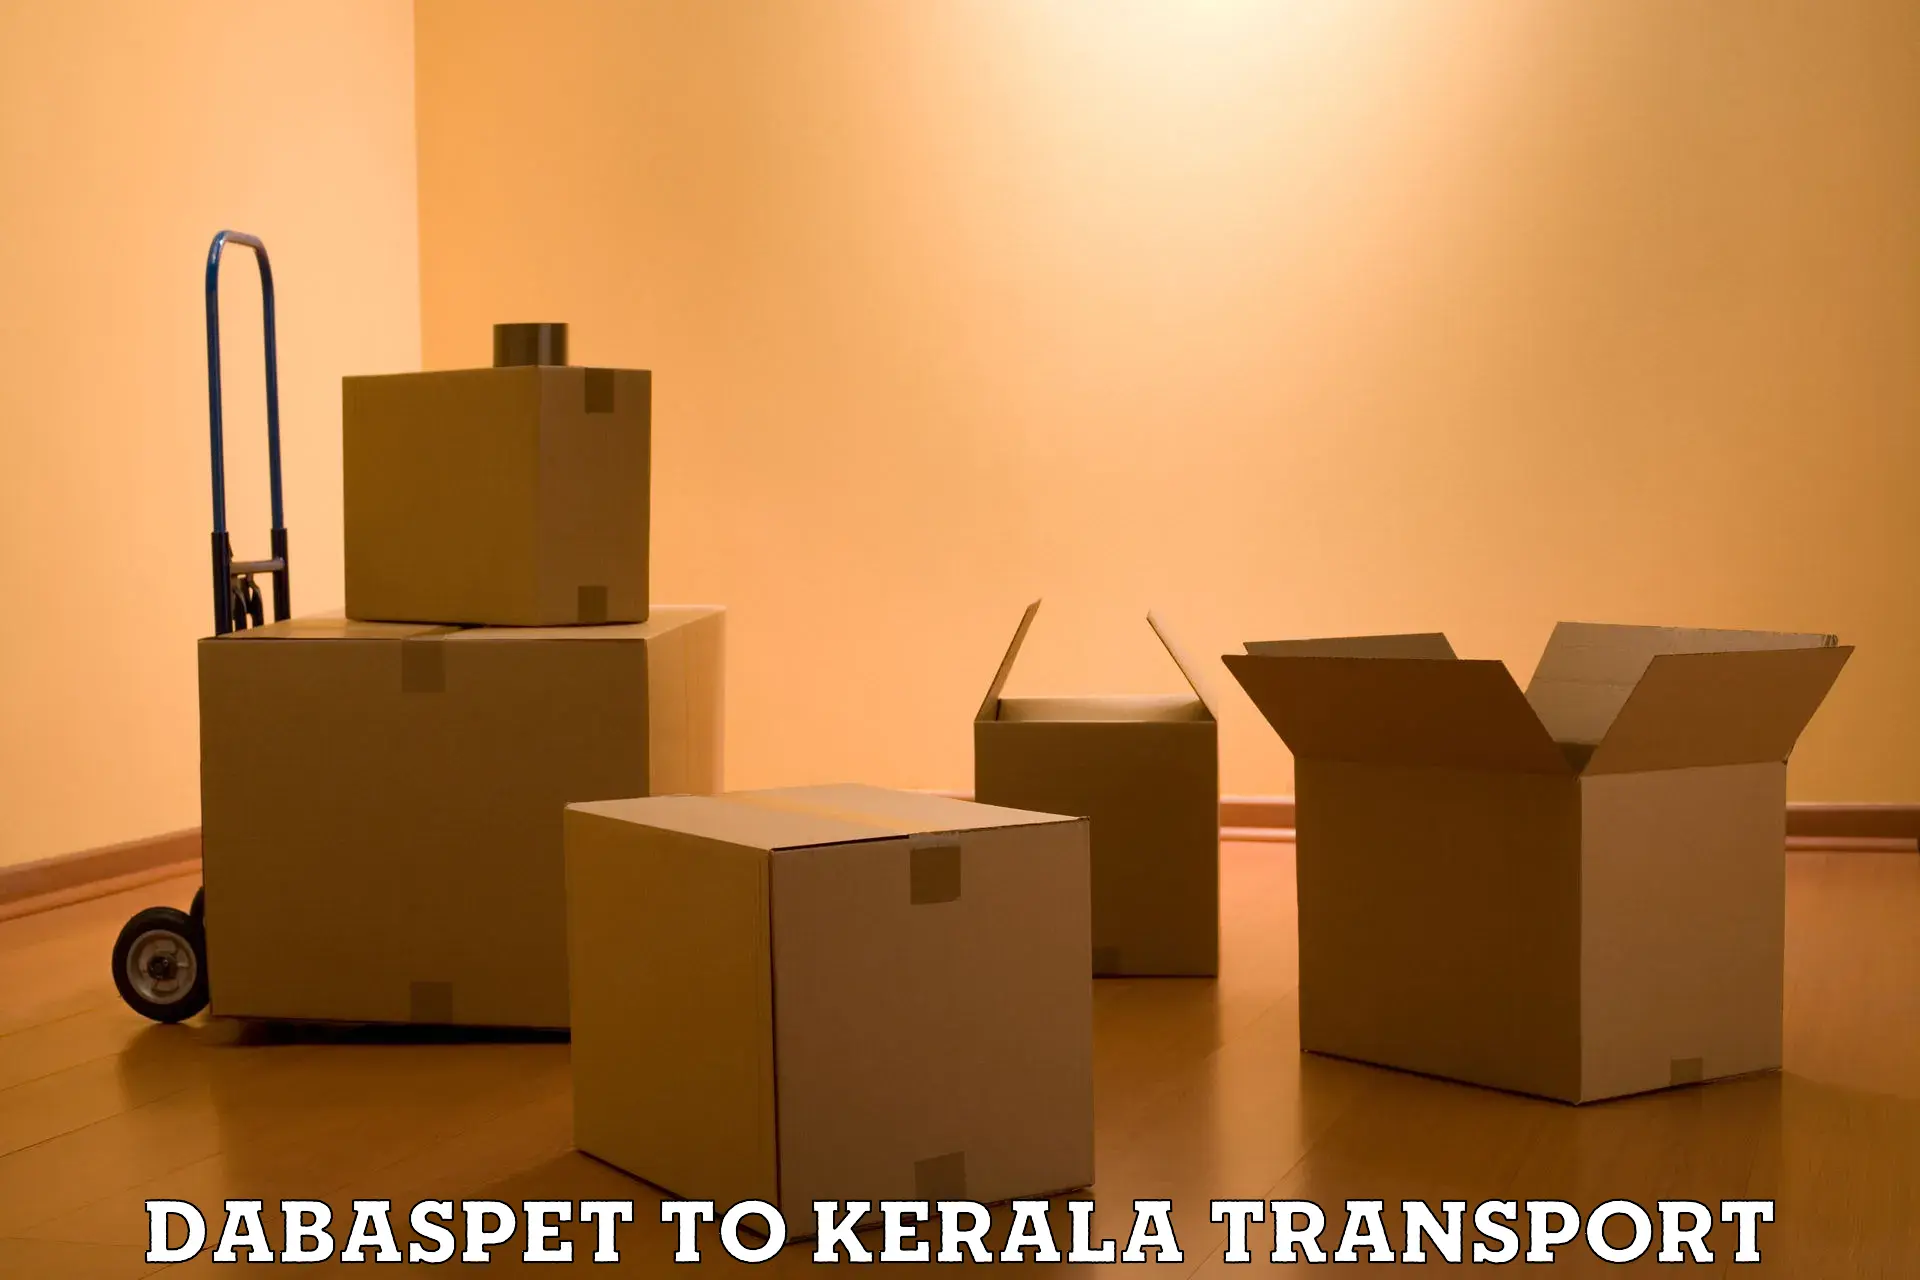 Commercial transport service Dabaspet to Kanhangad